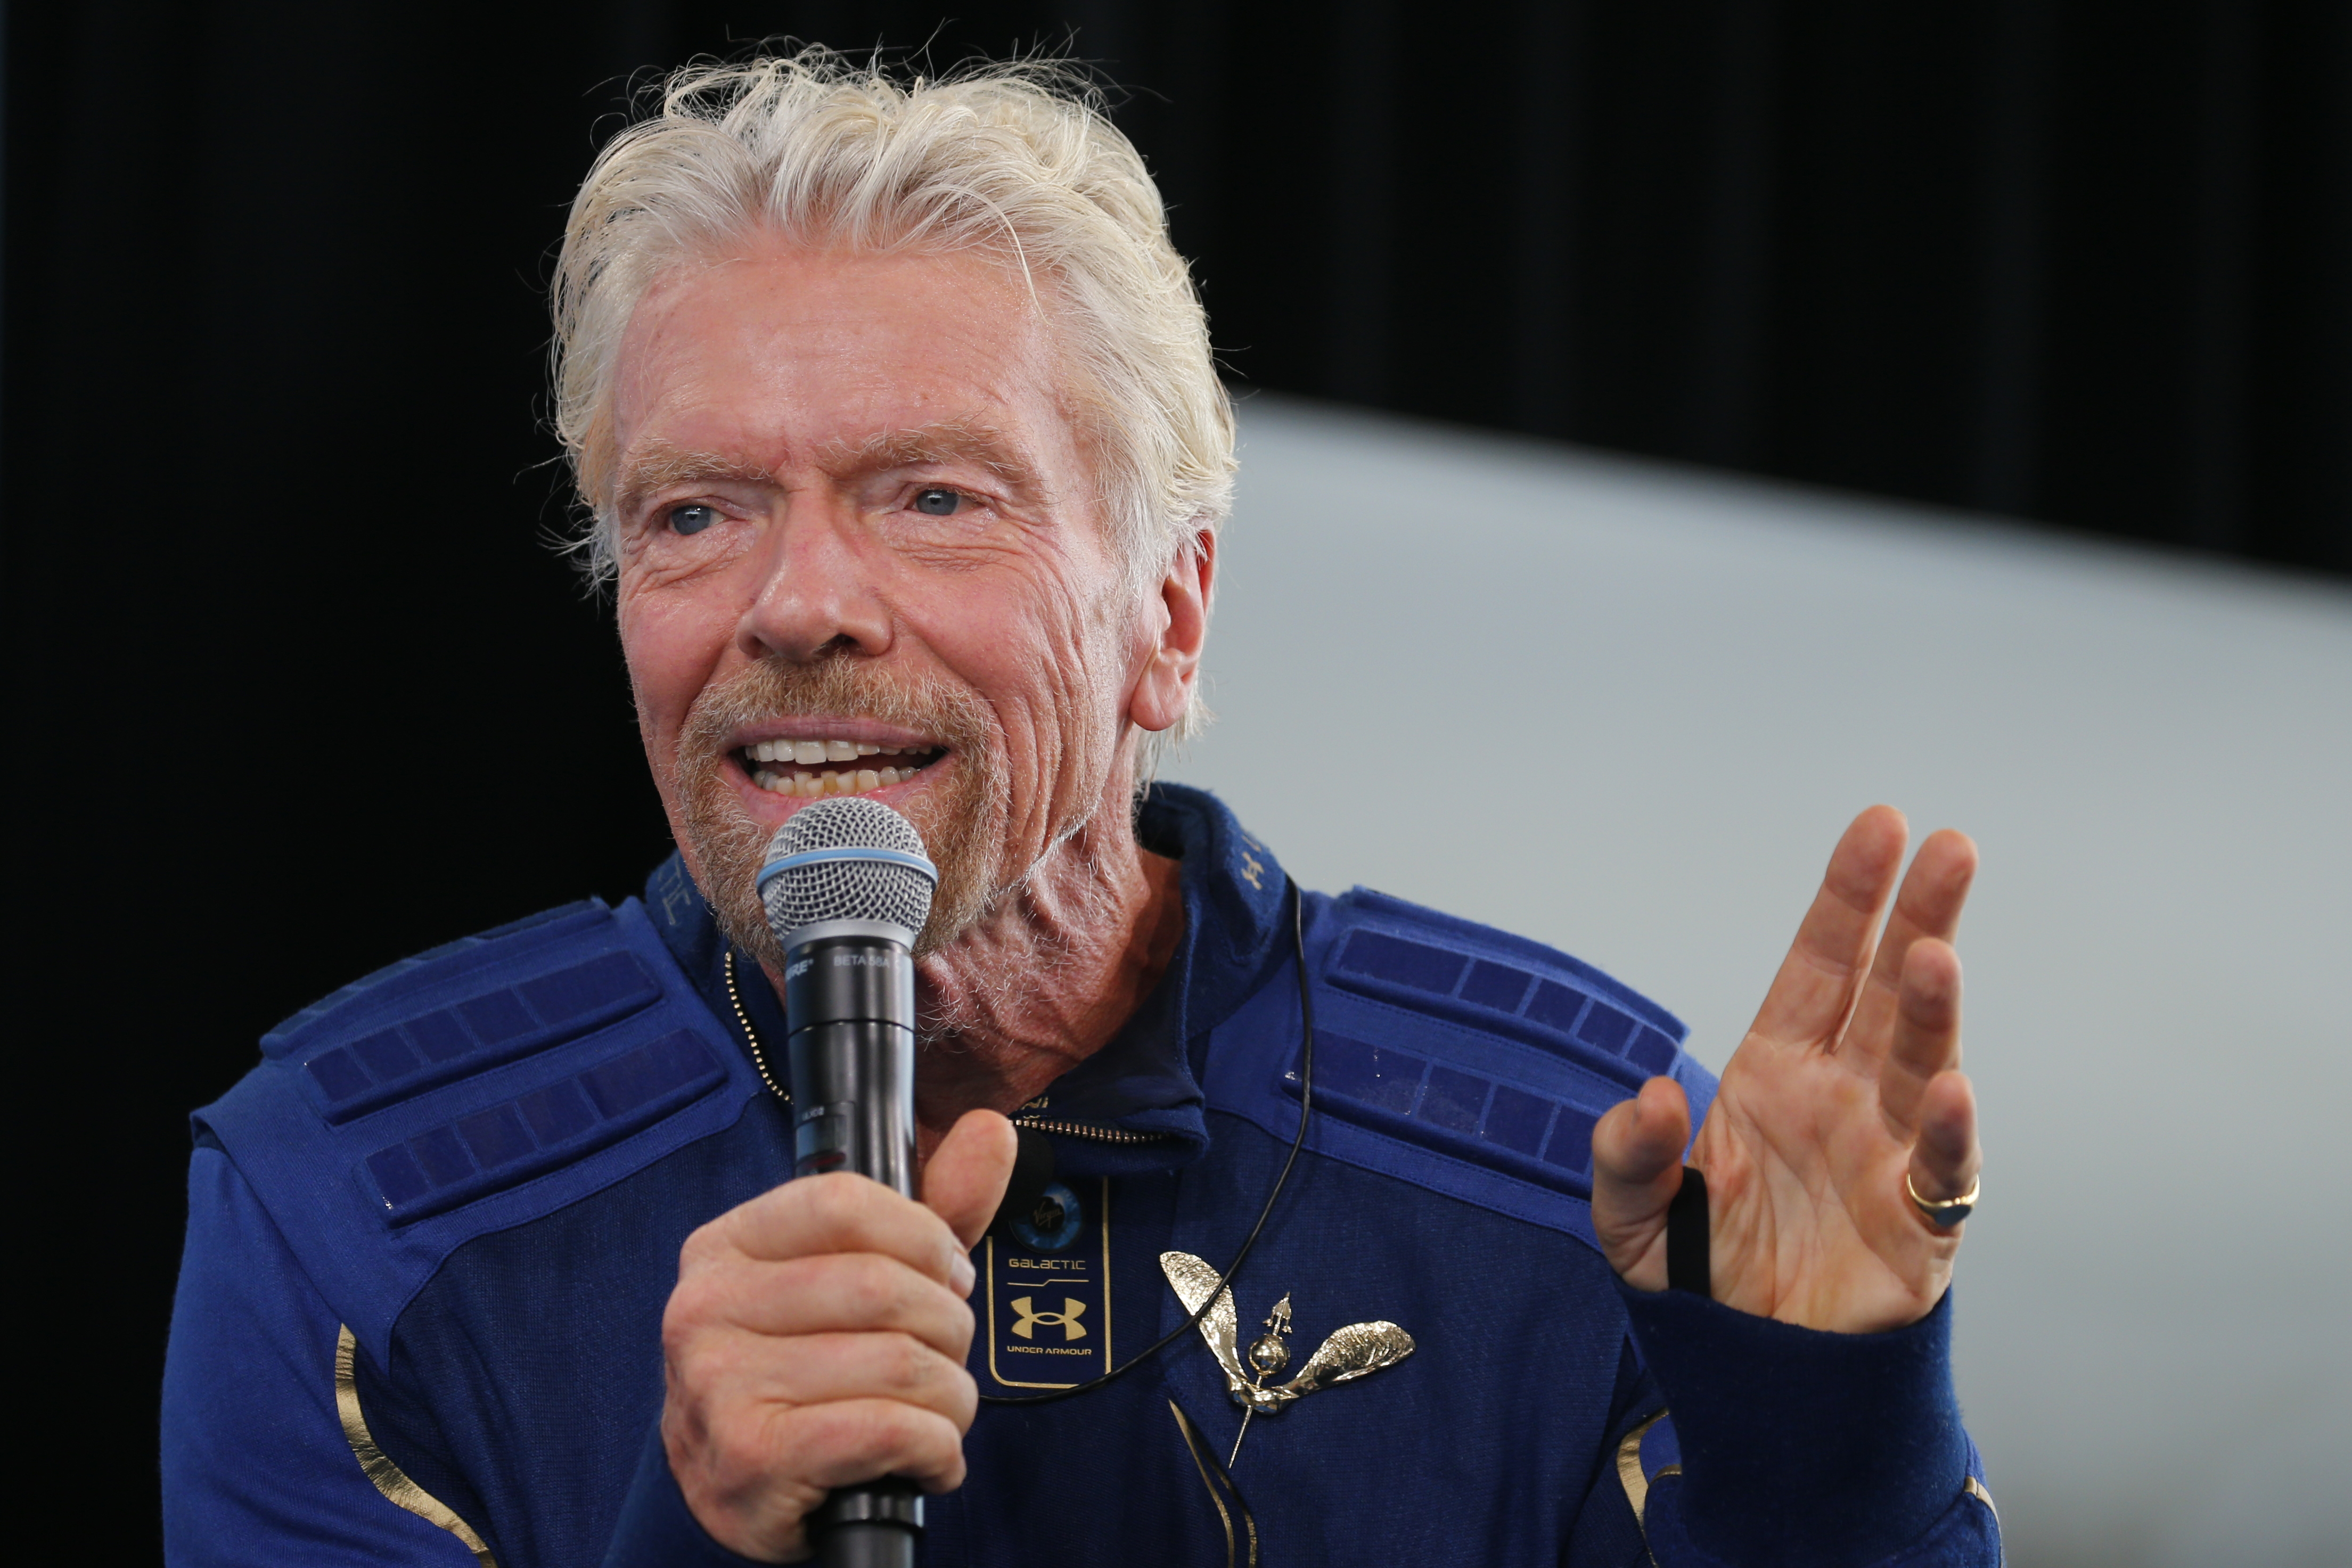 Billionaire entrepreneur Richard Branson wears his astronaut's wings at a news conference at Spaceport America